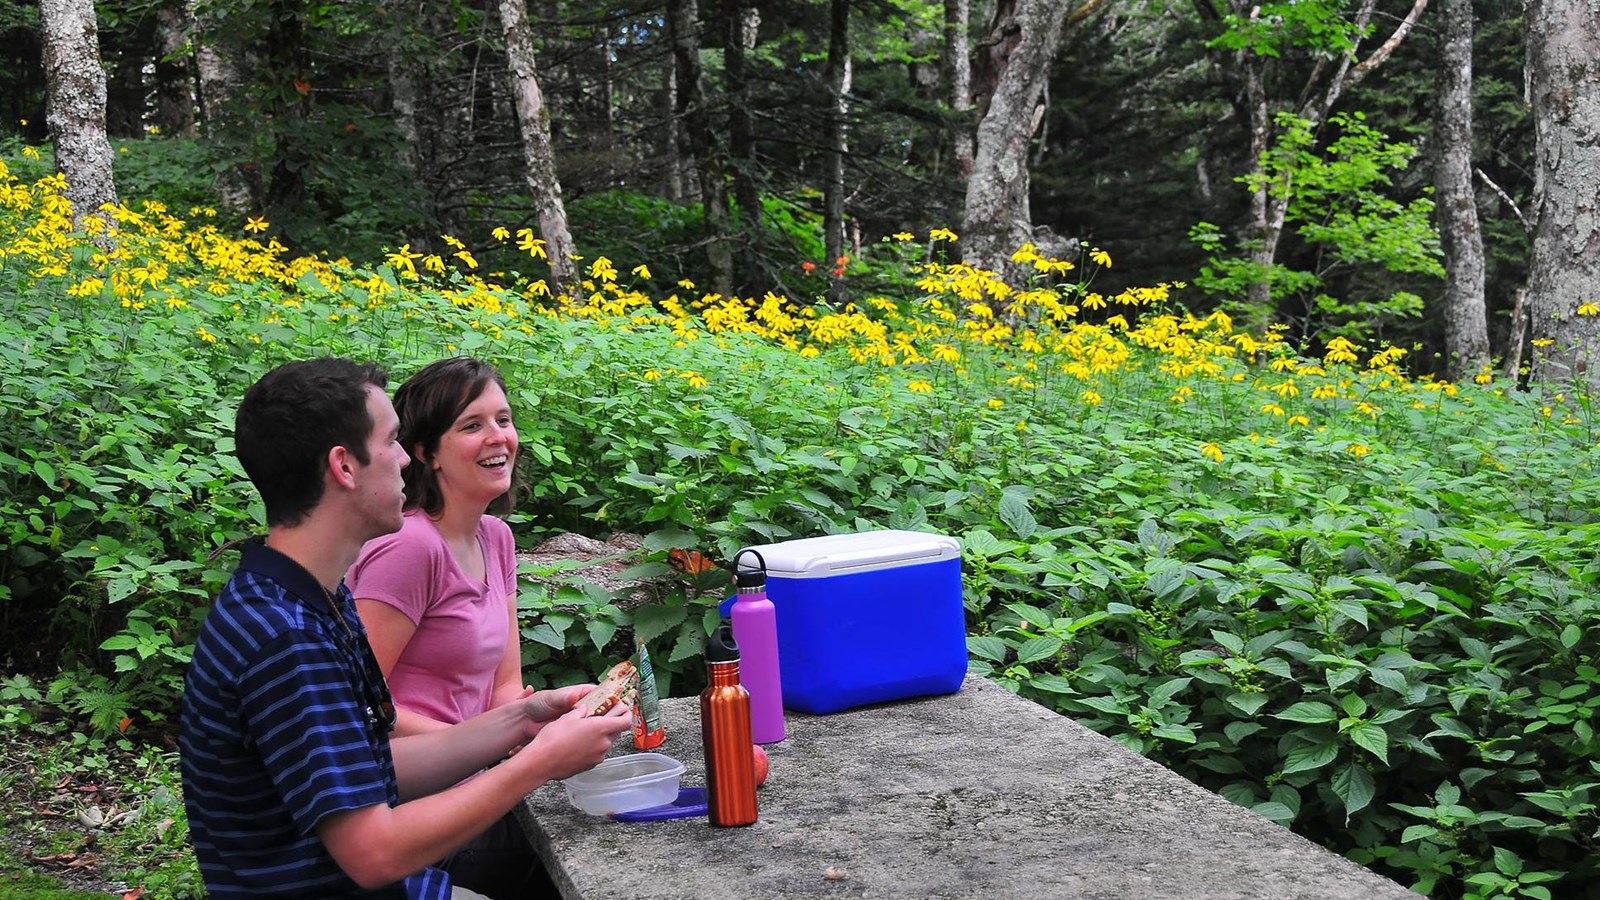 A man and women eat at a picnic table surrounded by trees and yellow wildflowers